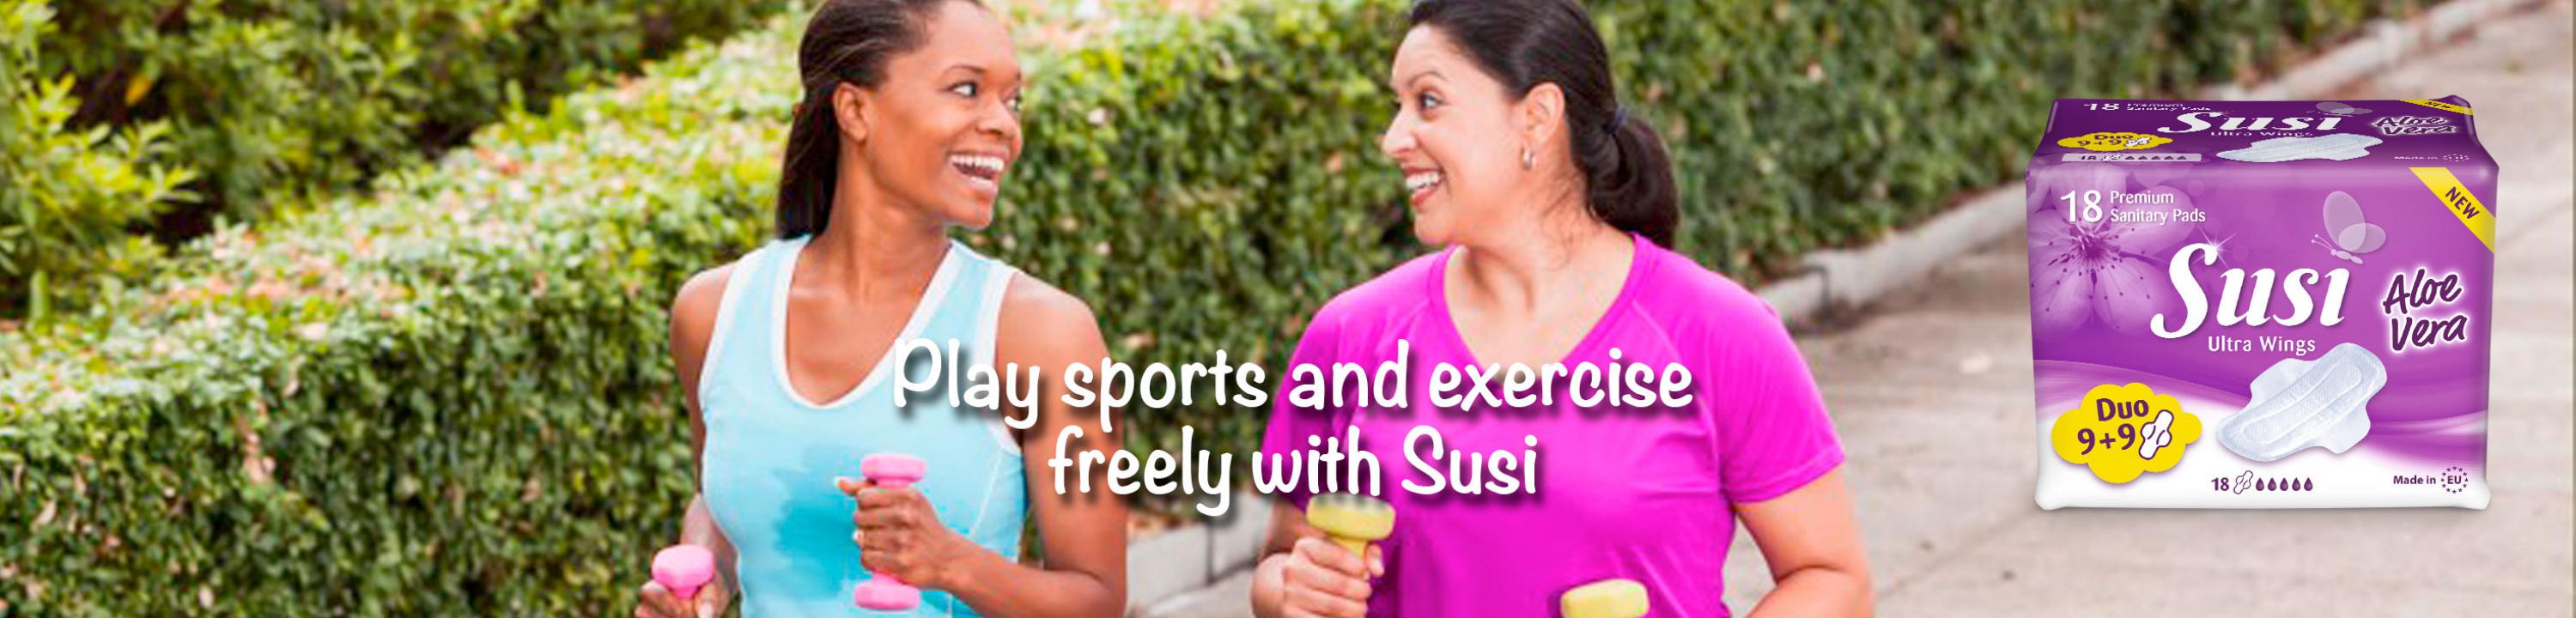 Play sports and exercise freely with Susi